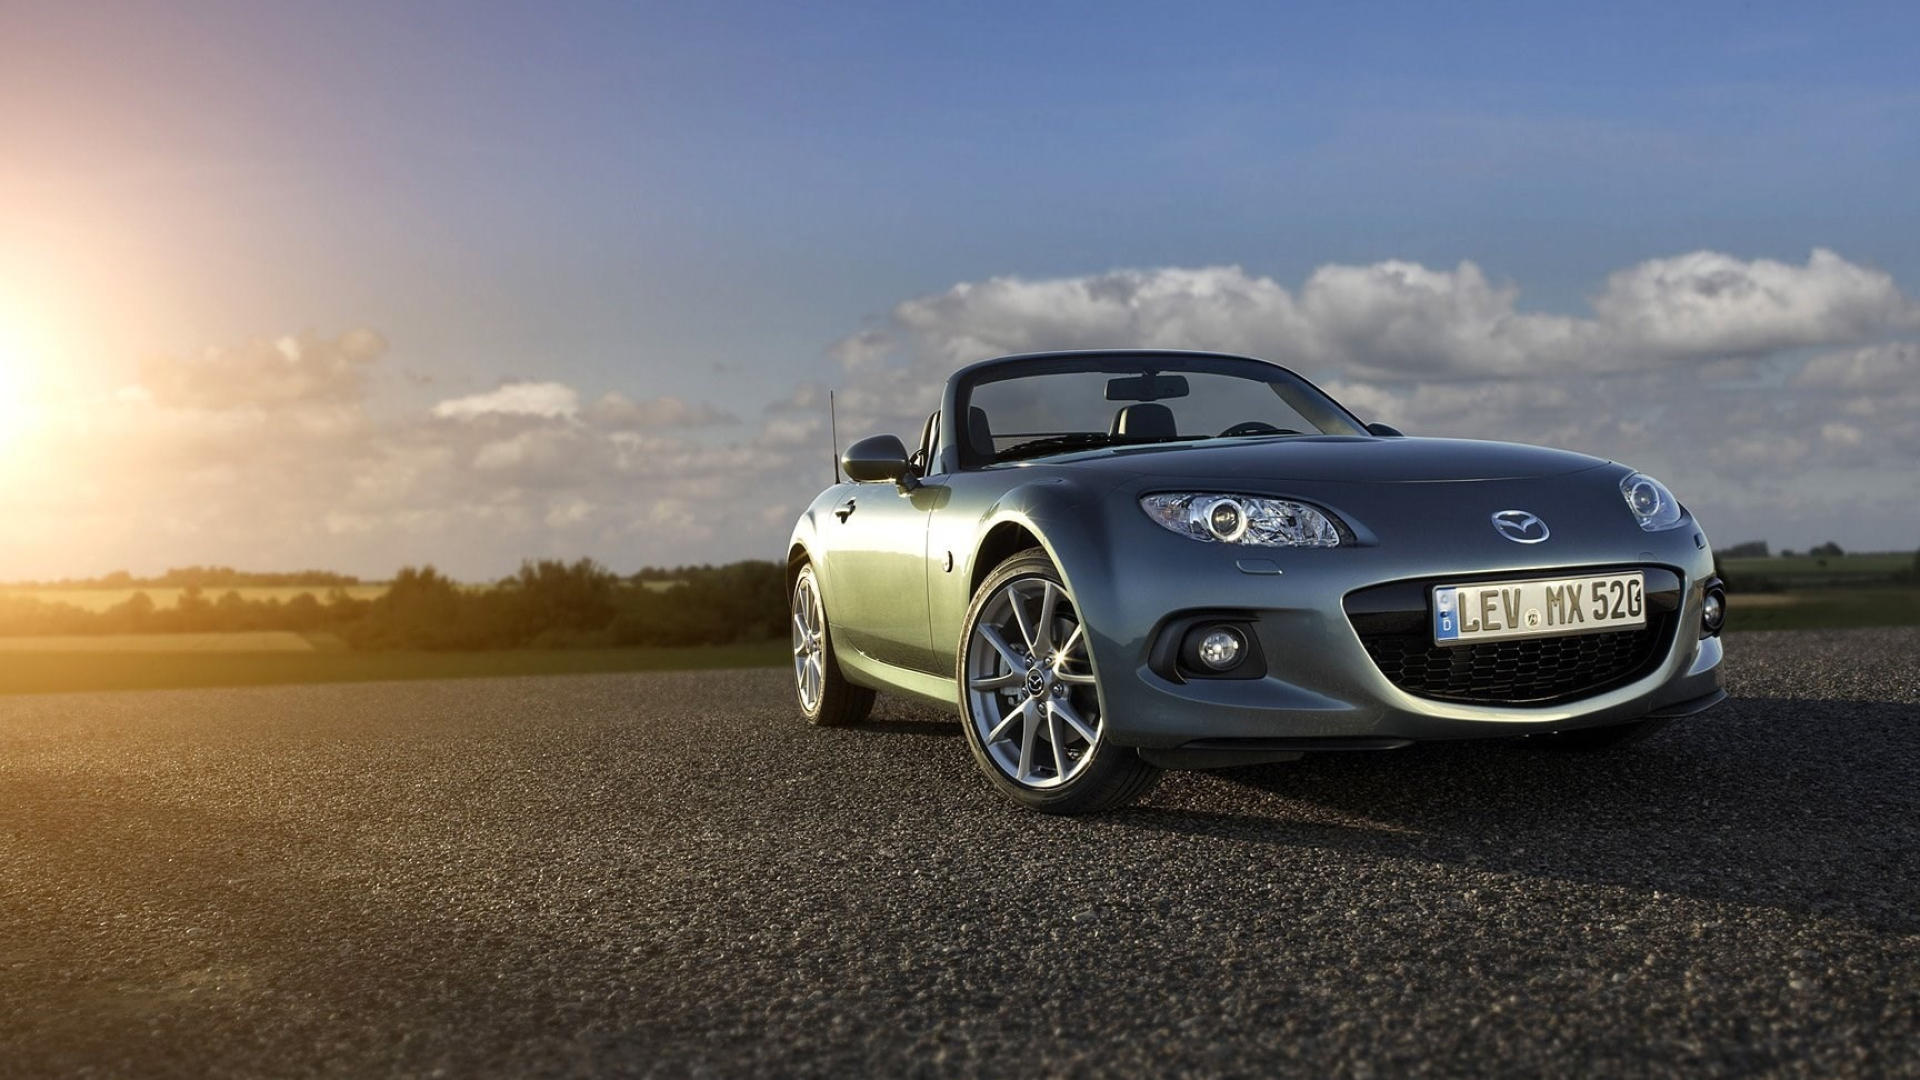 Mazda MX-5, Beautiful wallpapers, Shared by enthusiasts, Captivating design, 1920x1080 Full HD Desktop